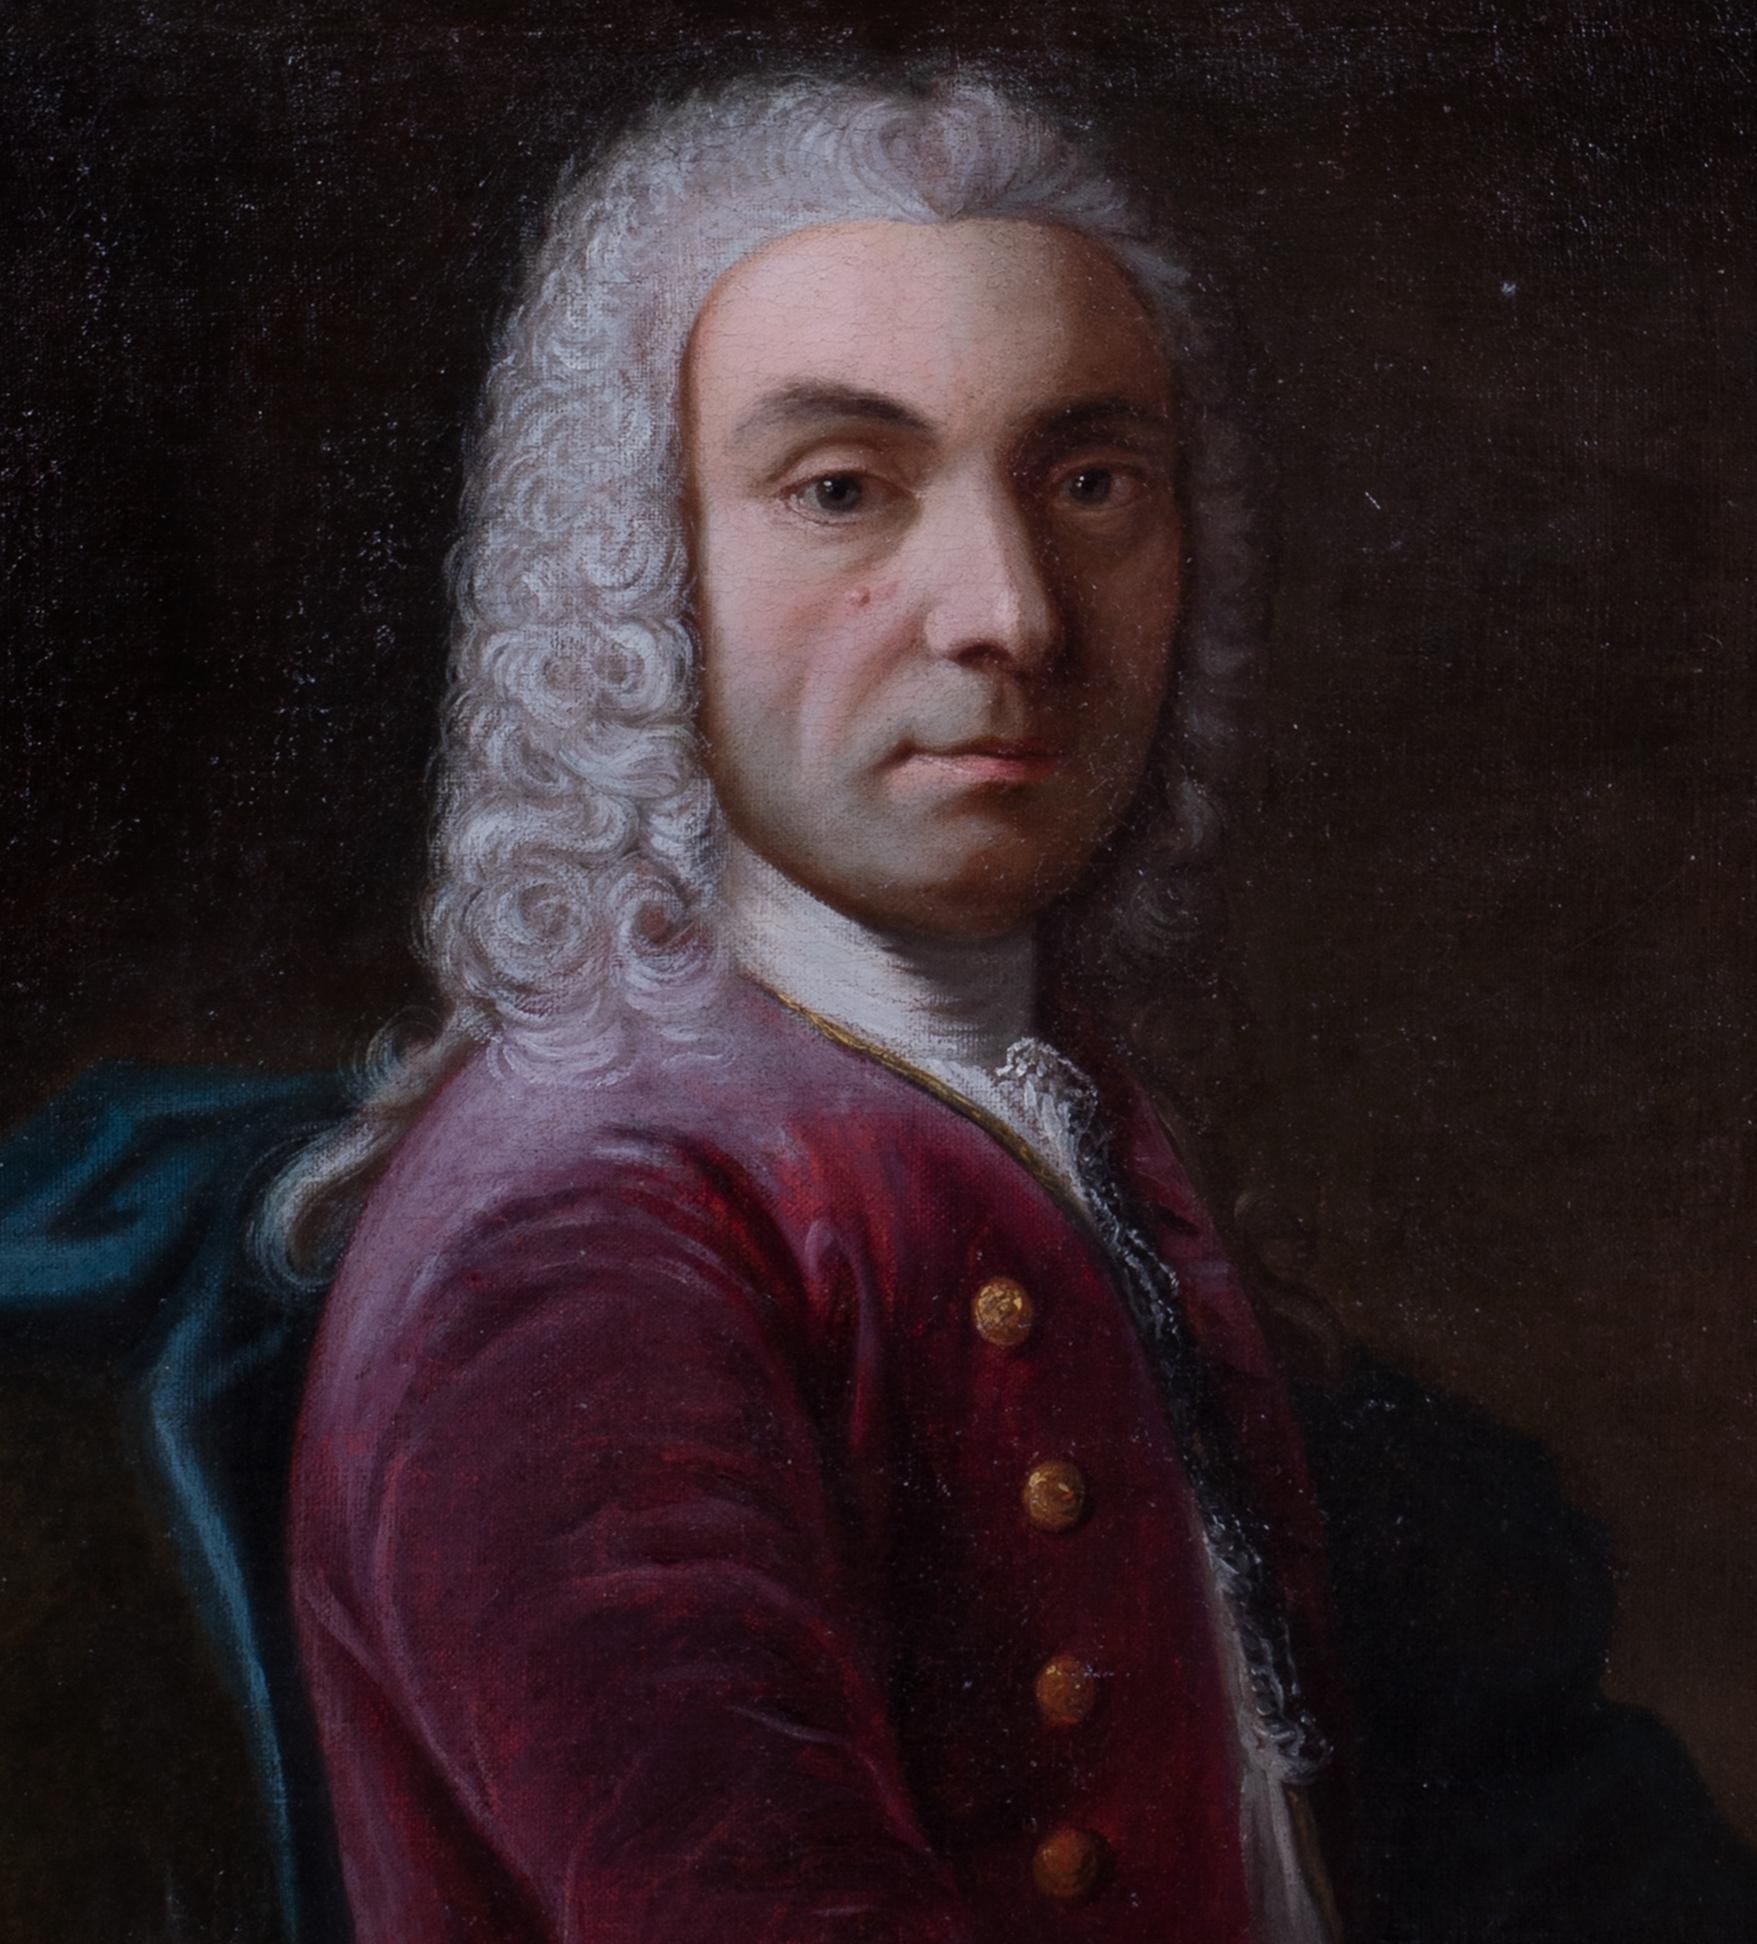 Portrait Of A Spanish Marquess, 18th Century 

attributed to Louis-Michel VAN LOO (1707-1771)

Large 18th European portrait of a Spanish Marquees / Noble at a bureaux signing a document, oil on canvas attributed to Louis-Michel Van Loo. Good quality